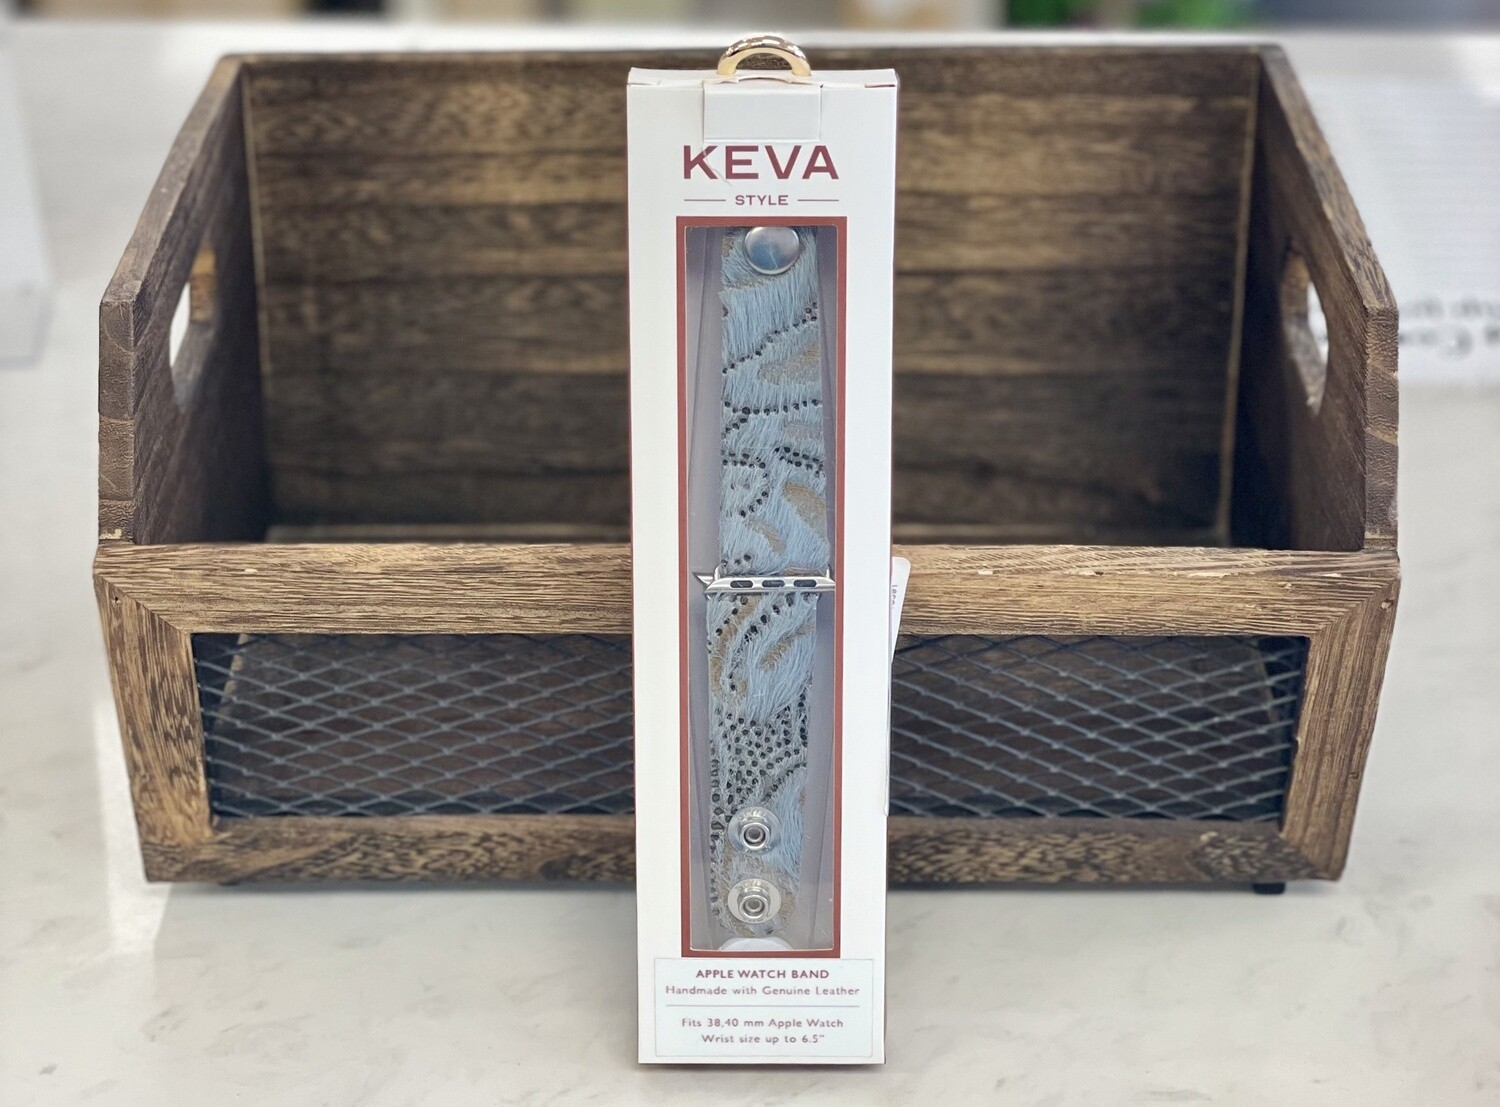 Keva Style Apple Watch Bands, Colour: Peacock